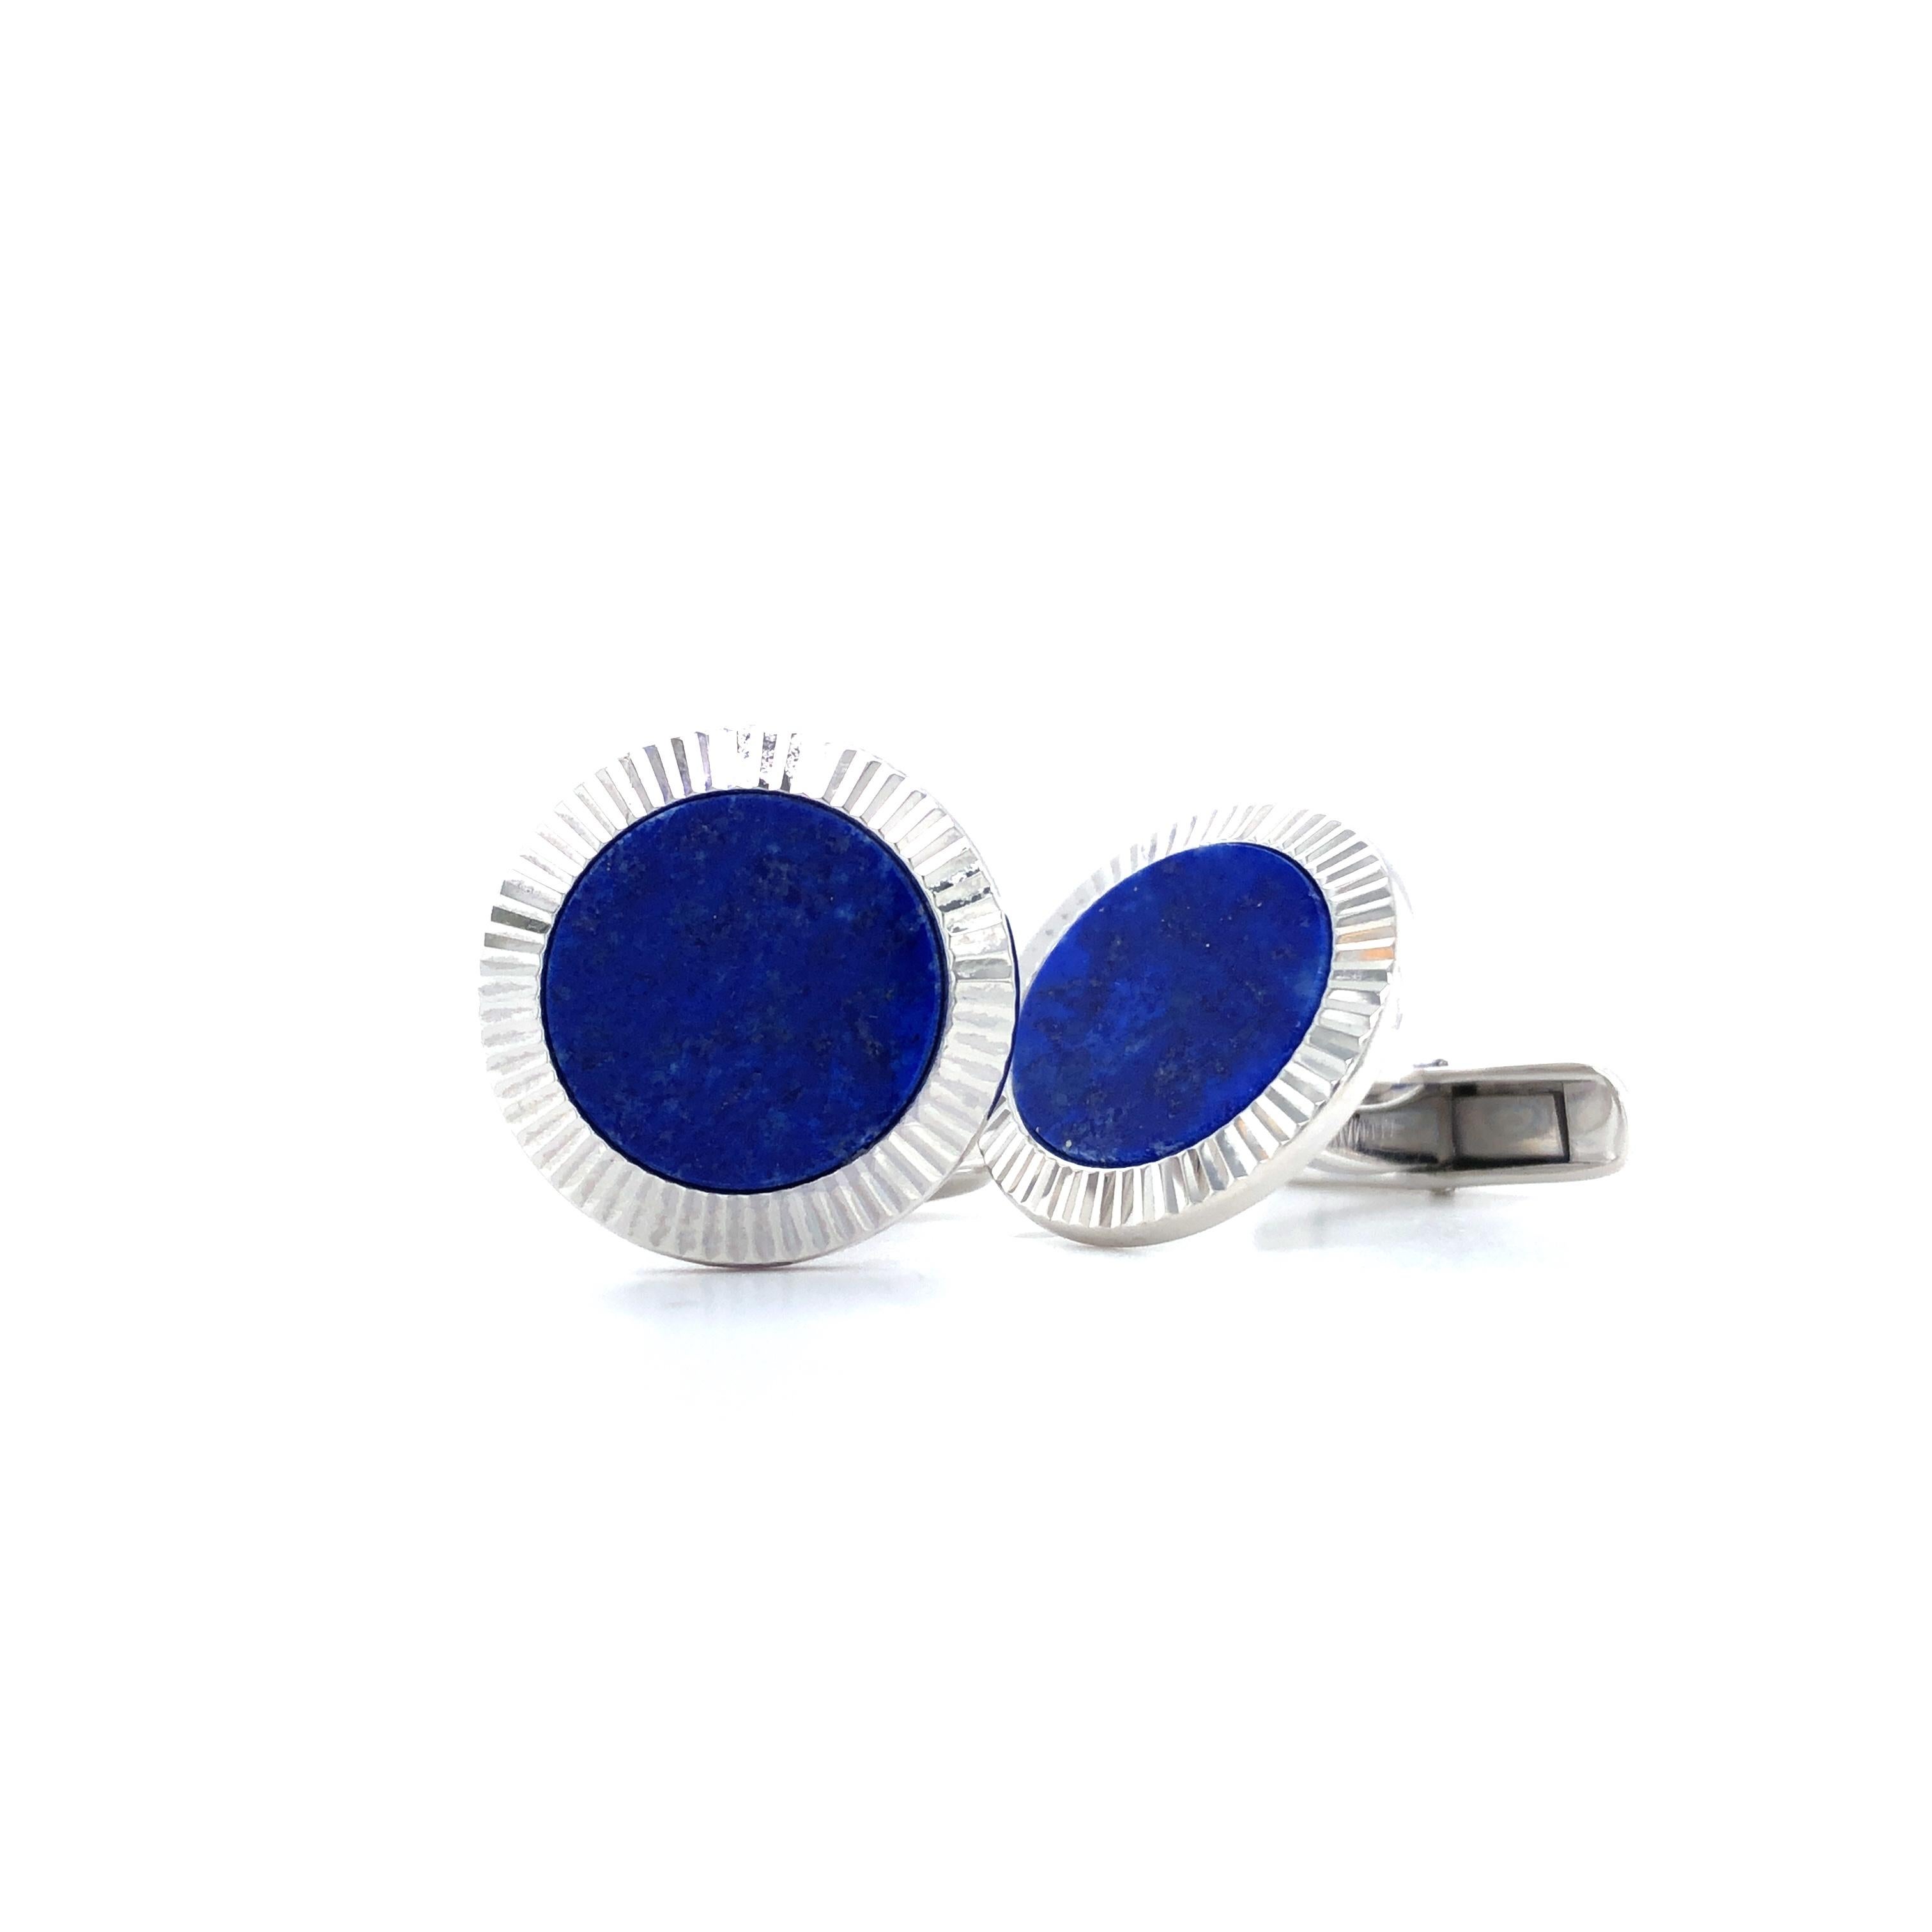 Fluted Round Cufflinks in Solid 925 Sterling Silver, Rhodium Plated, Lapis Lazuli, 19 mm by Victor Mayer
Cufflinks made in the workshop of VICTOR MAYER in Pforzheim, Germany. The quality meets the highest standards: solid execution with a coating of